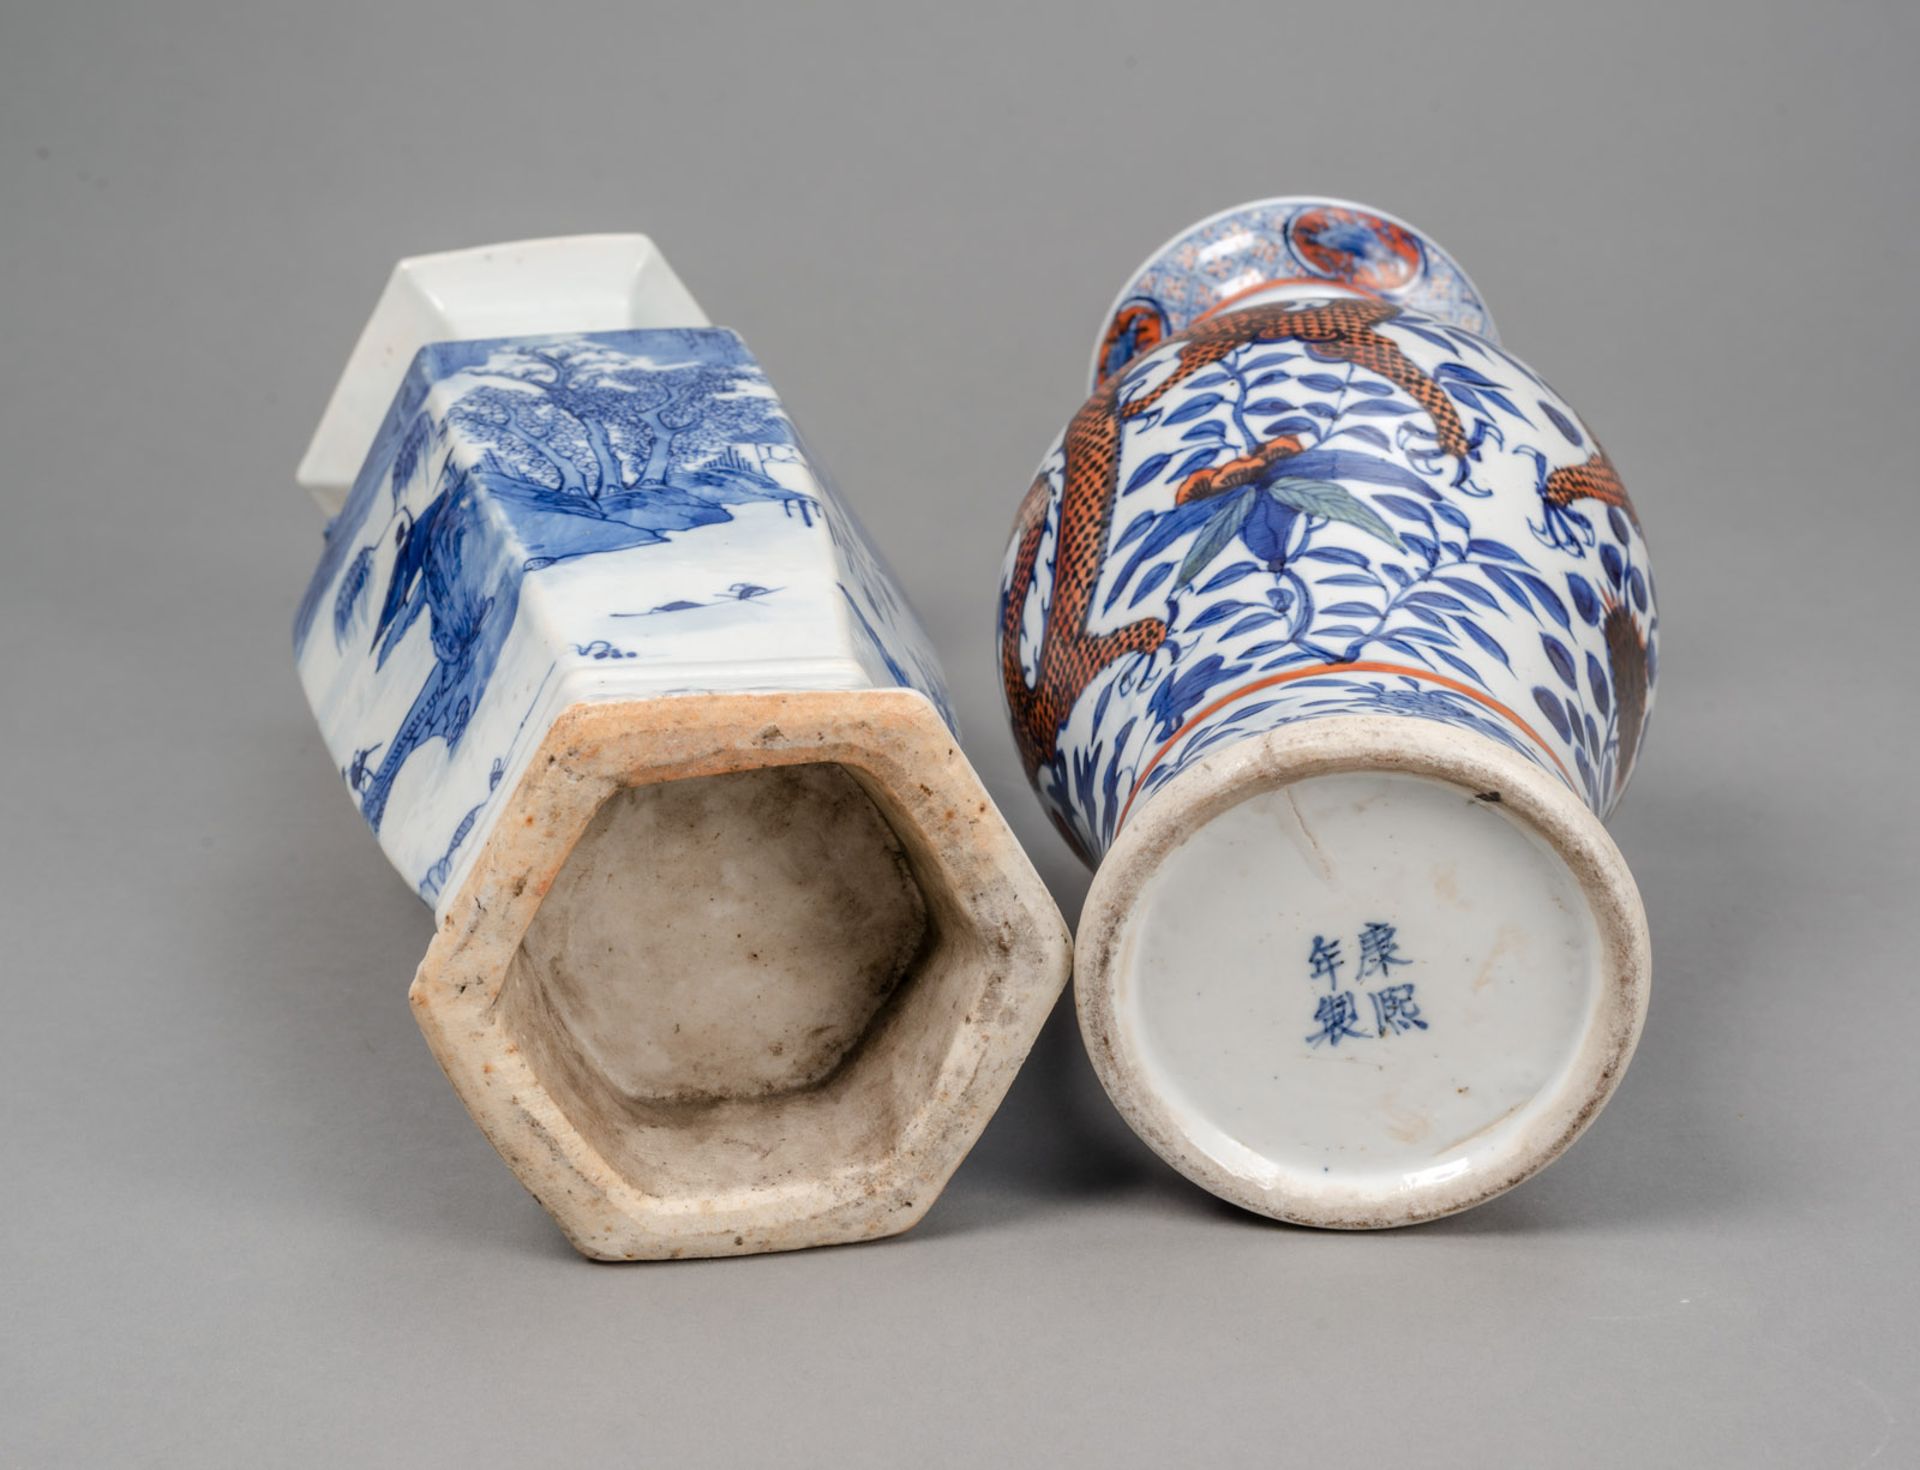 A HEXAGONAL BLUE AND WHITE LANDSCAPE PORCELAIN VASE AND A BLUE AND RED DRAGON VASE - Image 5 of 5